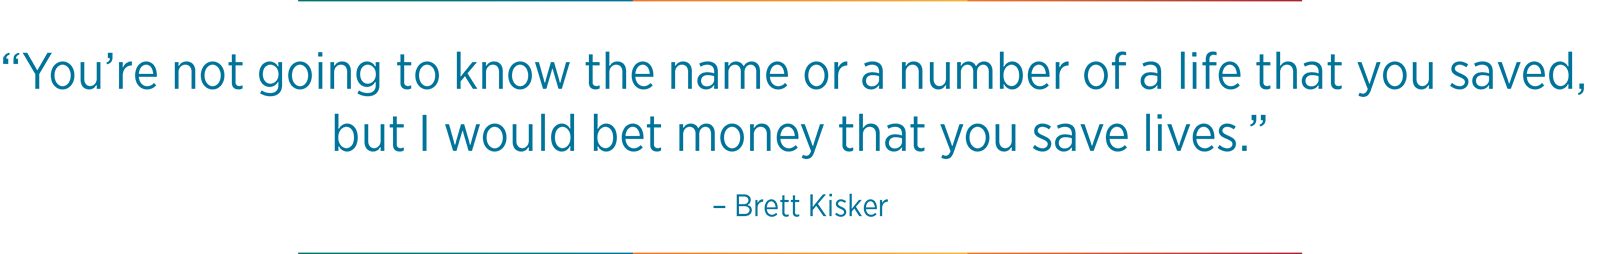 "You're not going to know the name or a number of a life that you saved, but I would bet money that you save lives." - Brett Kisker